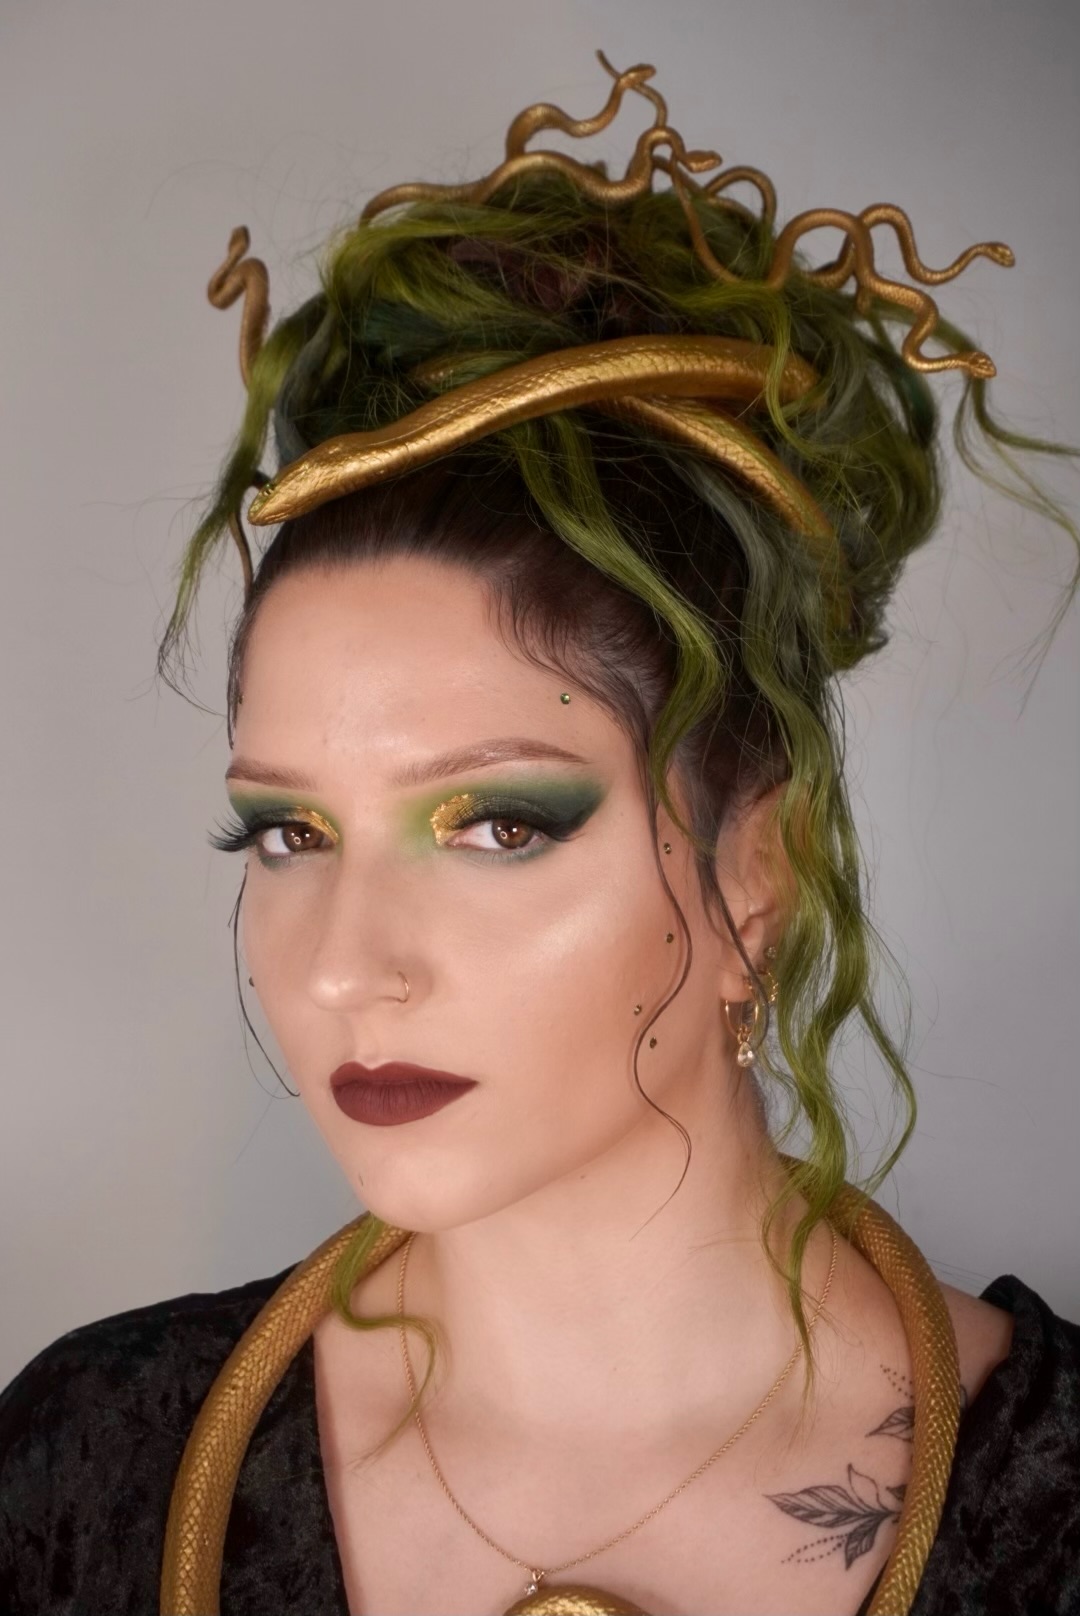 Halloween Hairstyles — Get The Look: The Medusa - Bangstyle - House of Hair  Inspiration